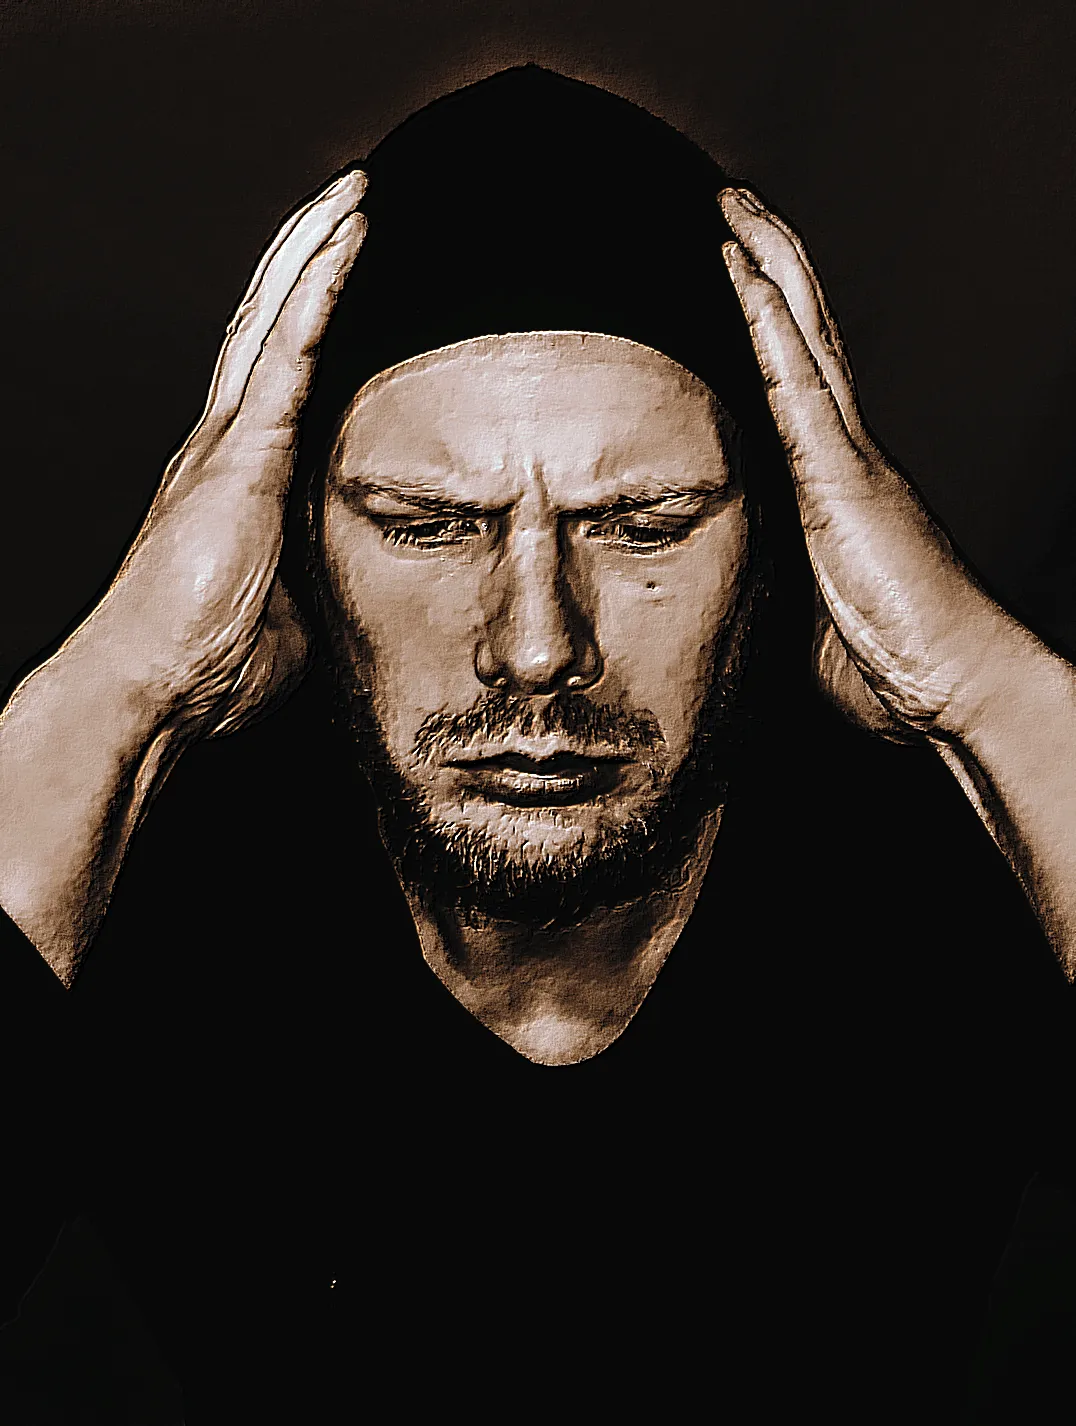 Distraught man with hood on and facial hair gripping his head with his hands